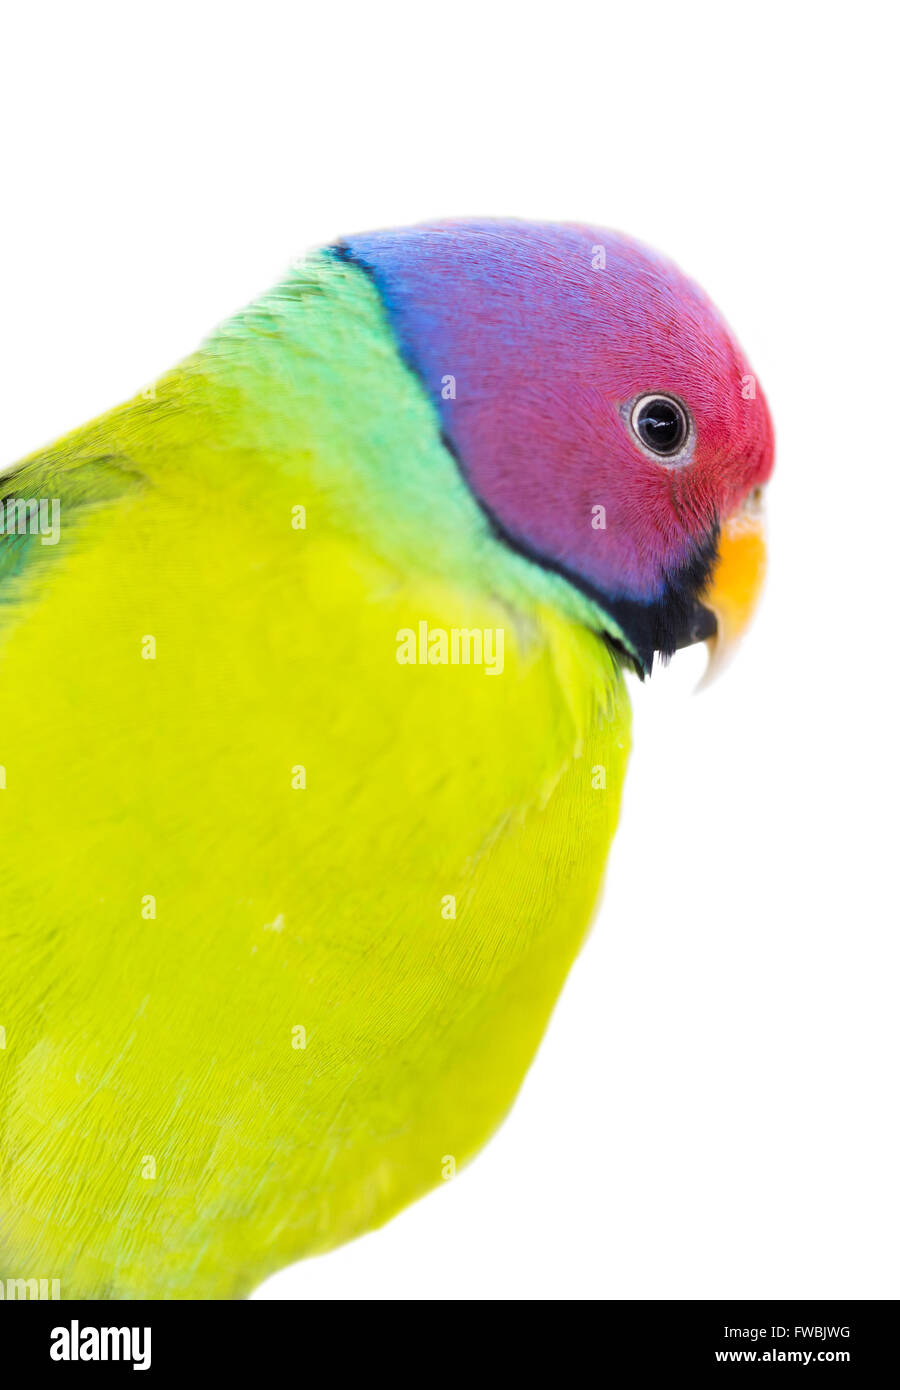 the exotic colorful birds on a white background Stock Photo